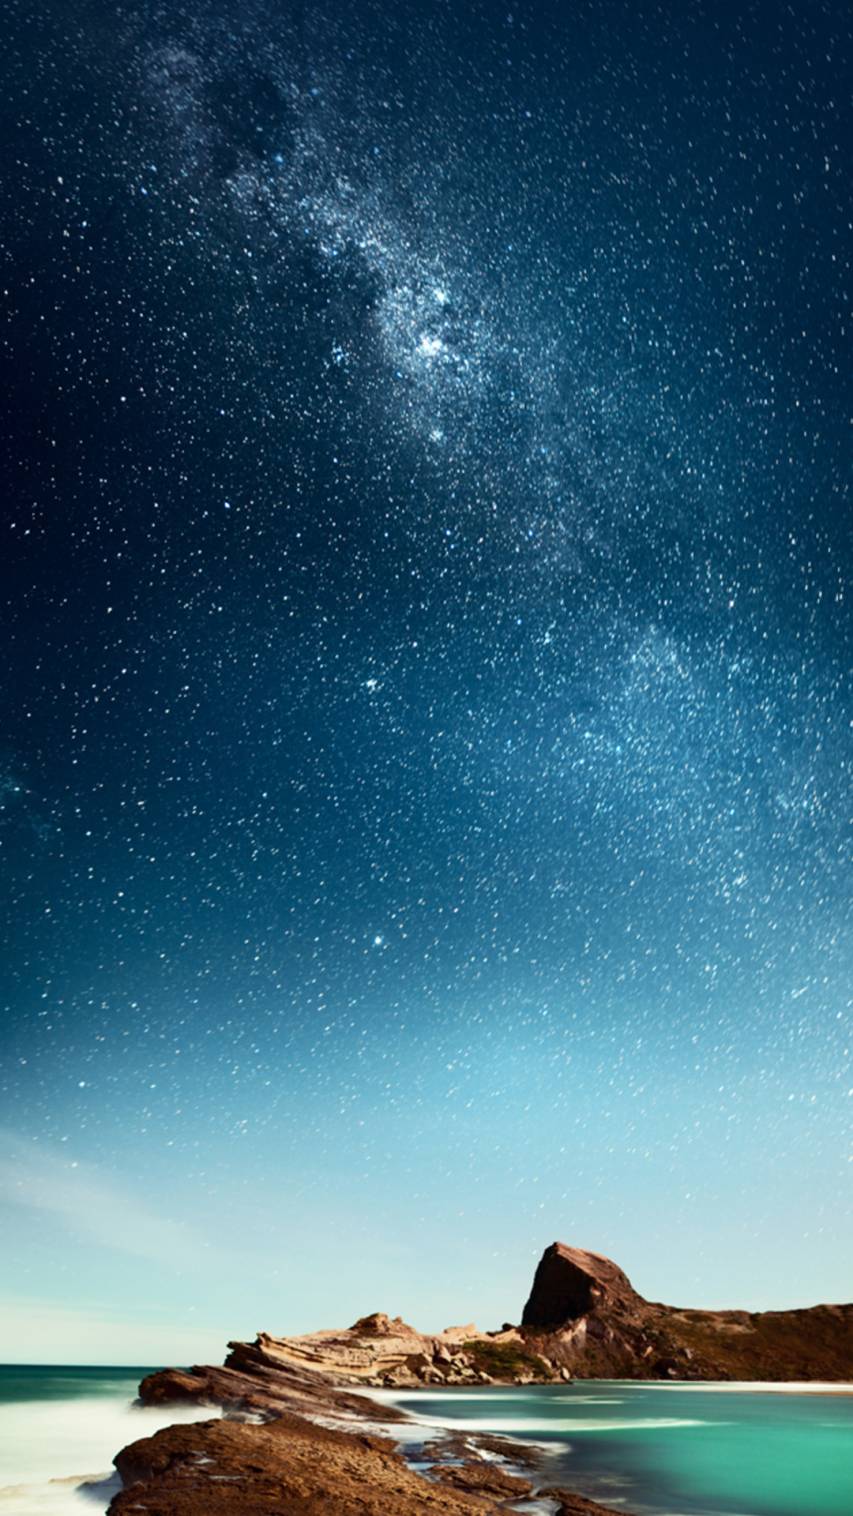 Cool Sky Scenes hd Wallpapers and Background for iPhone